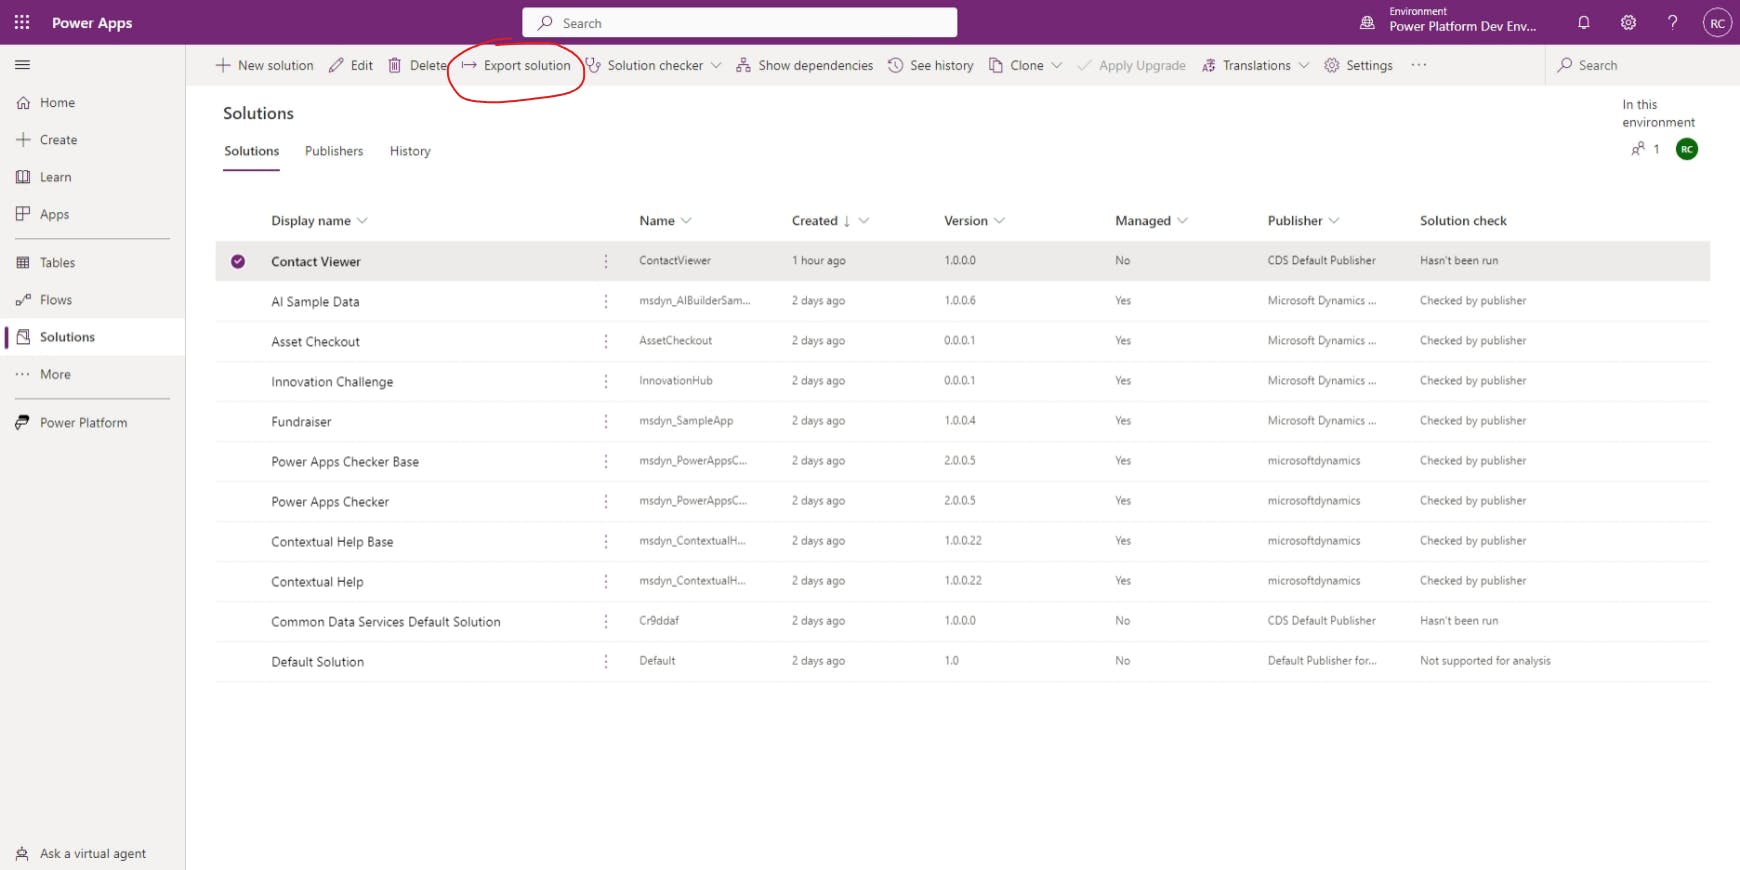 Power Apps Admin Center with Export solution circled